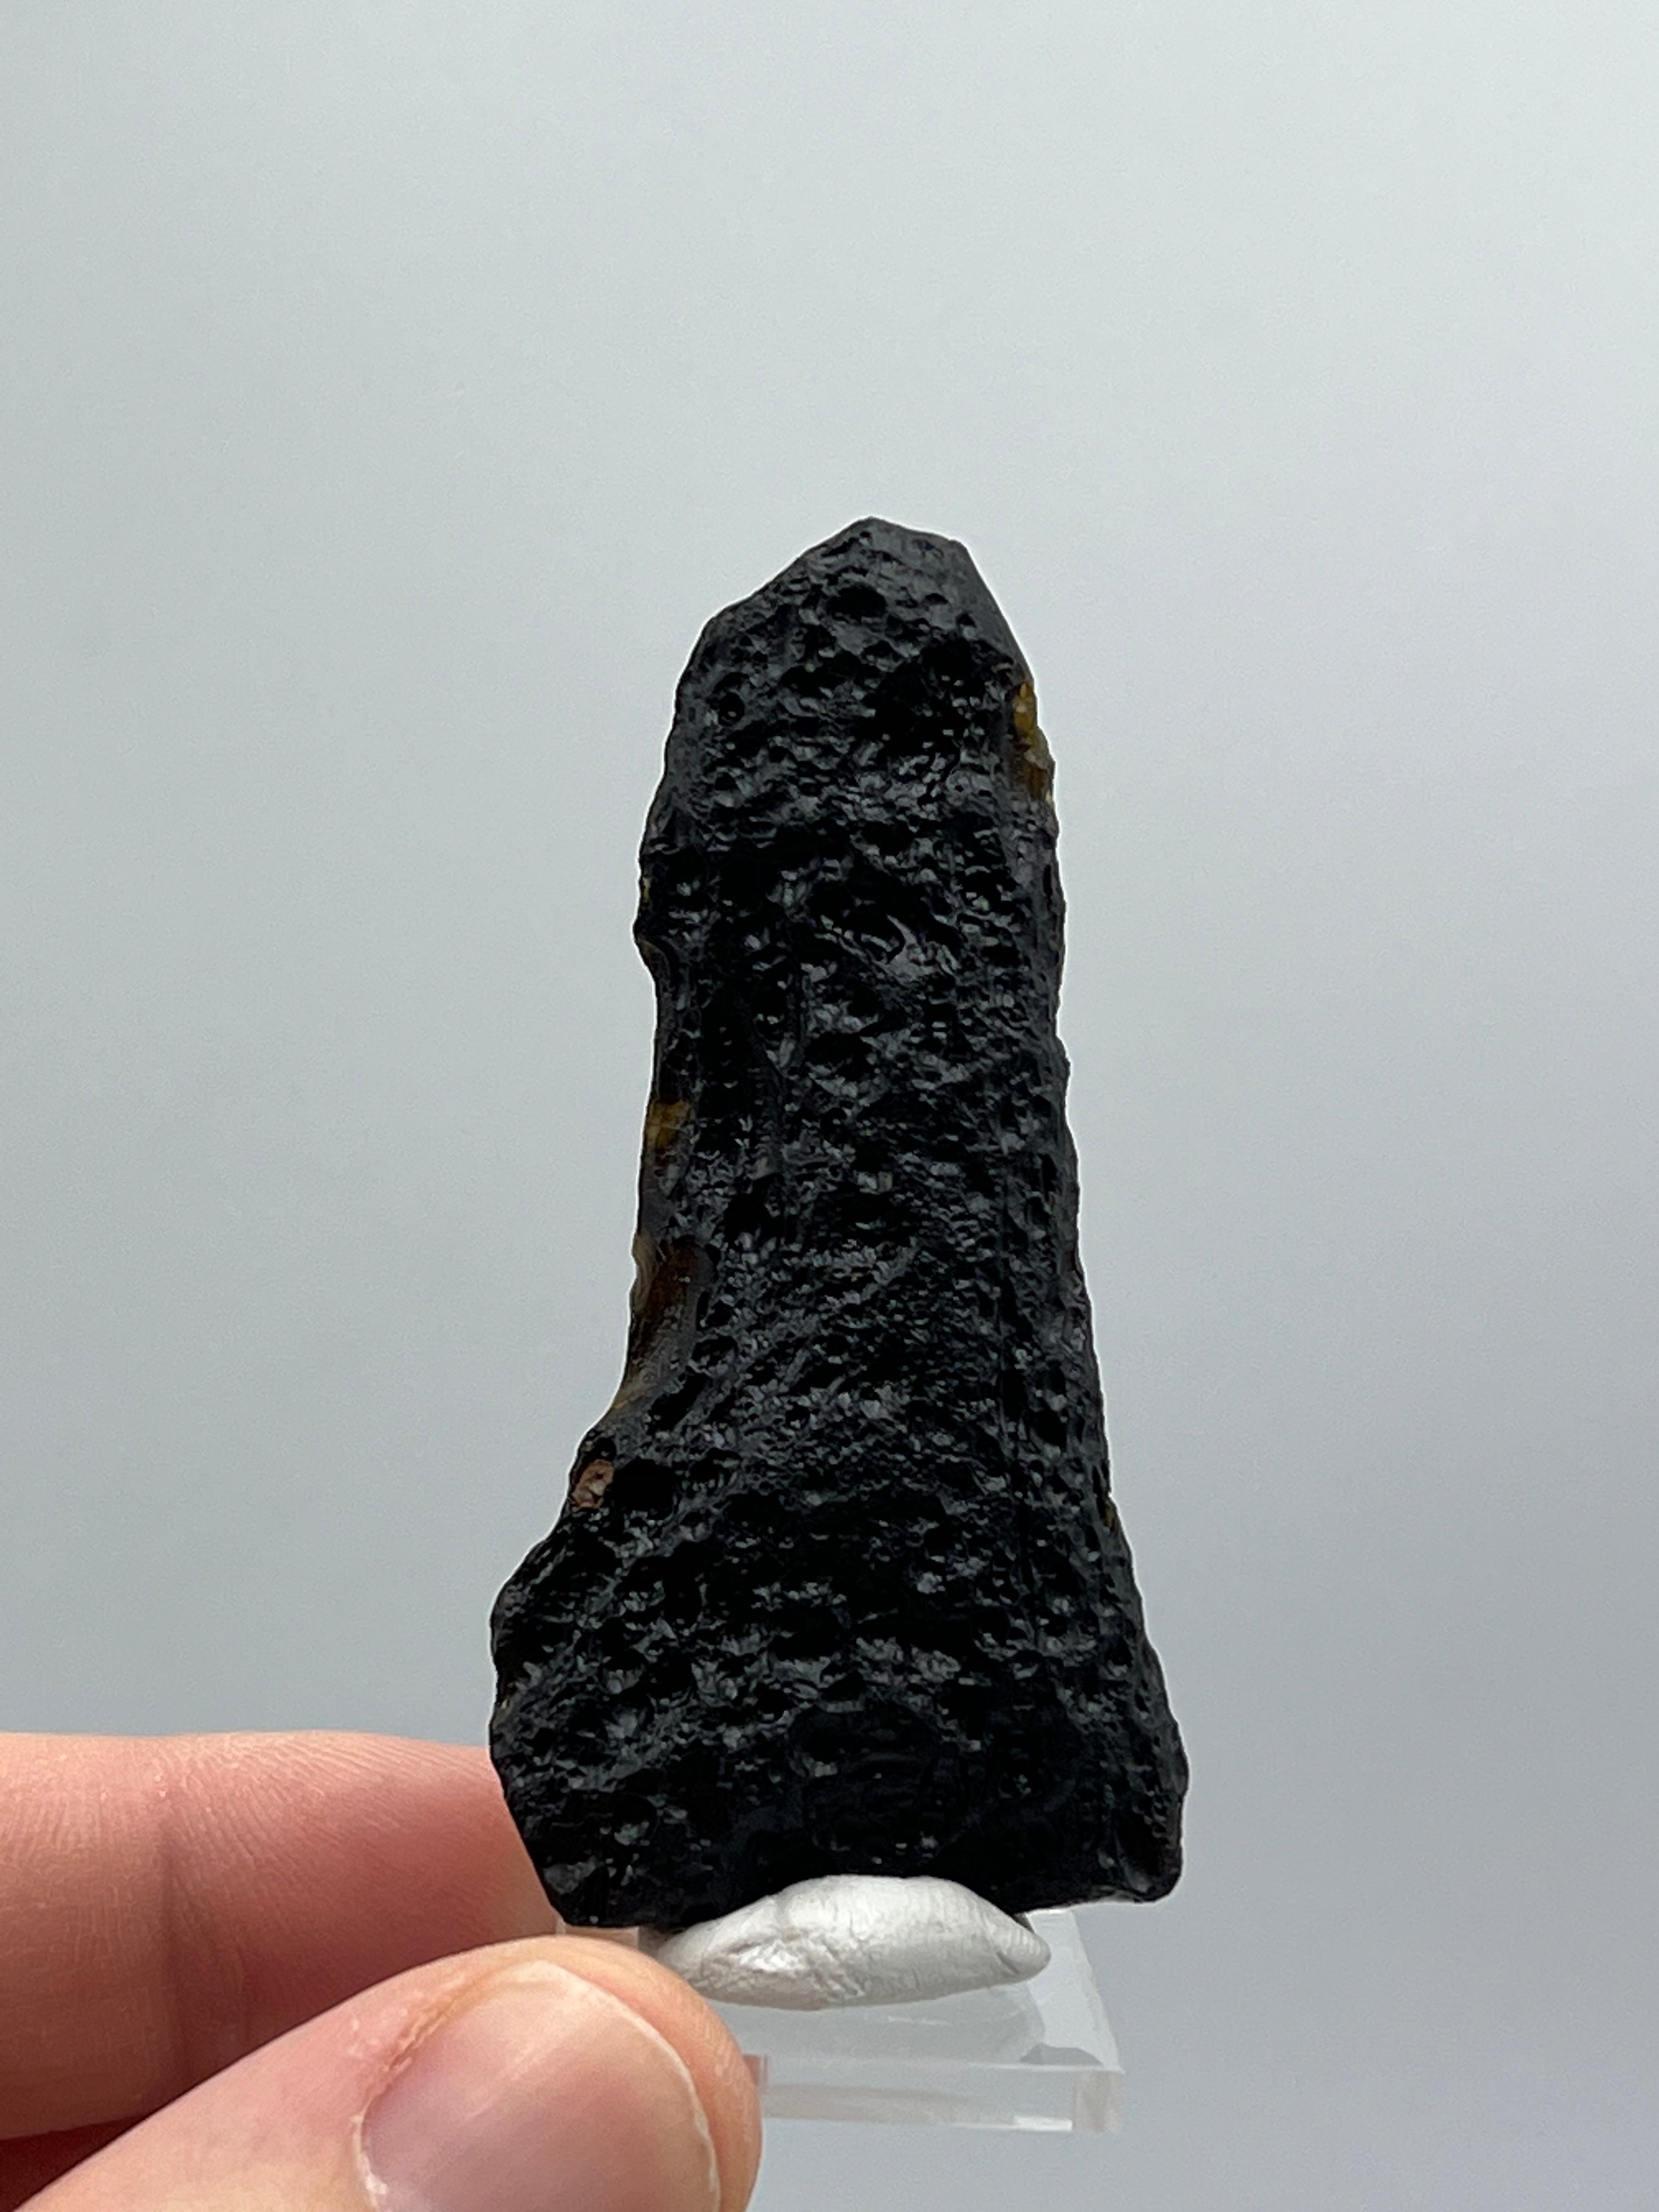 Tektite from Thailand D 21.2g - Earthly Secrets